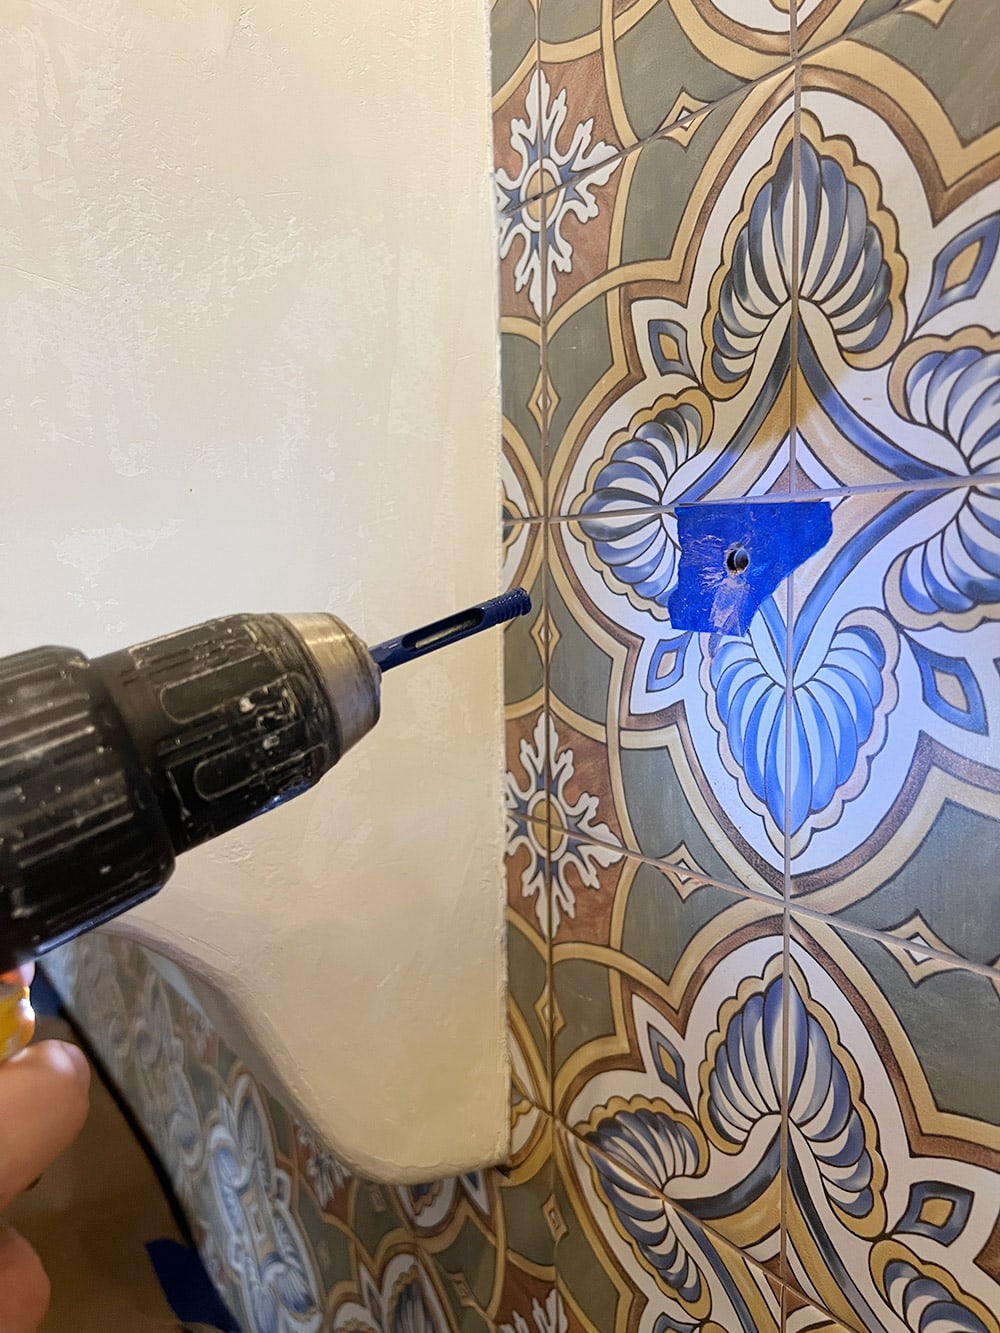 drilling into tile with a diamond bit